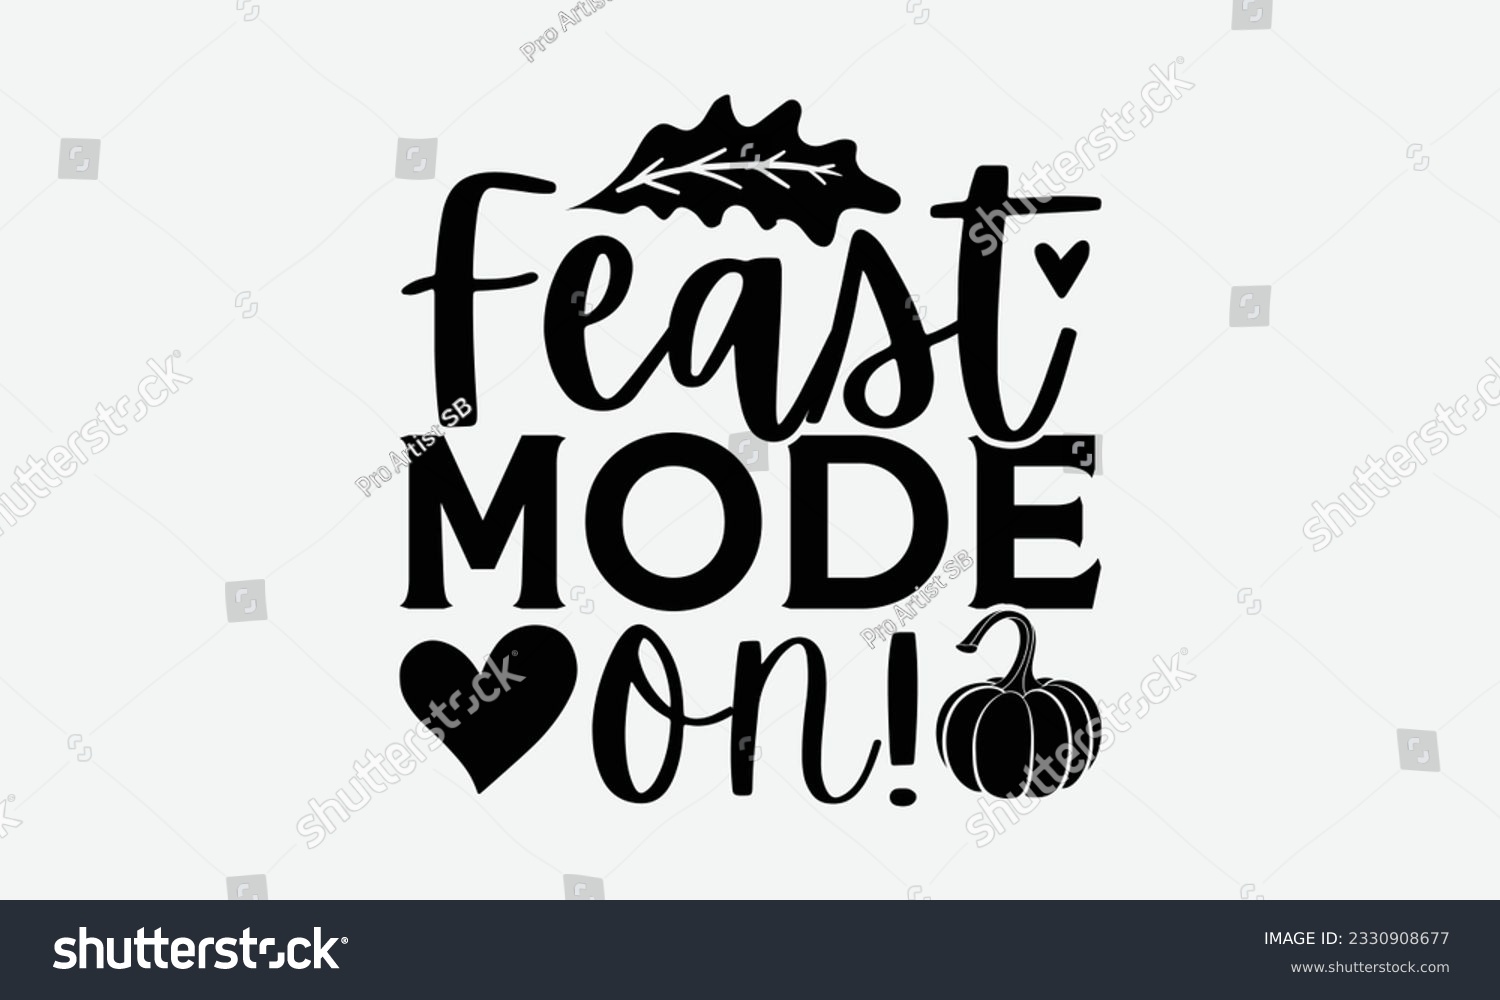 SVG of Feast Mode ON!  - Thanksgiving T-shirt Design Template, Thanksgiving Quotes File, Hand Drawn Lettering Phrase, SVG Files for Cutting Cricut and Silhouette. svg